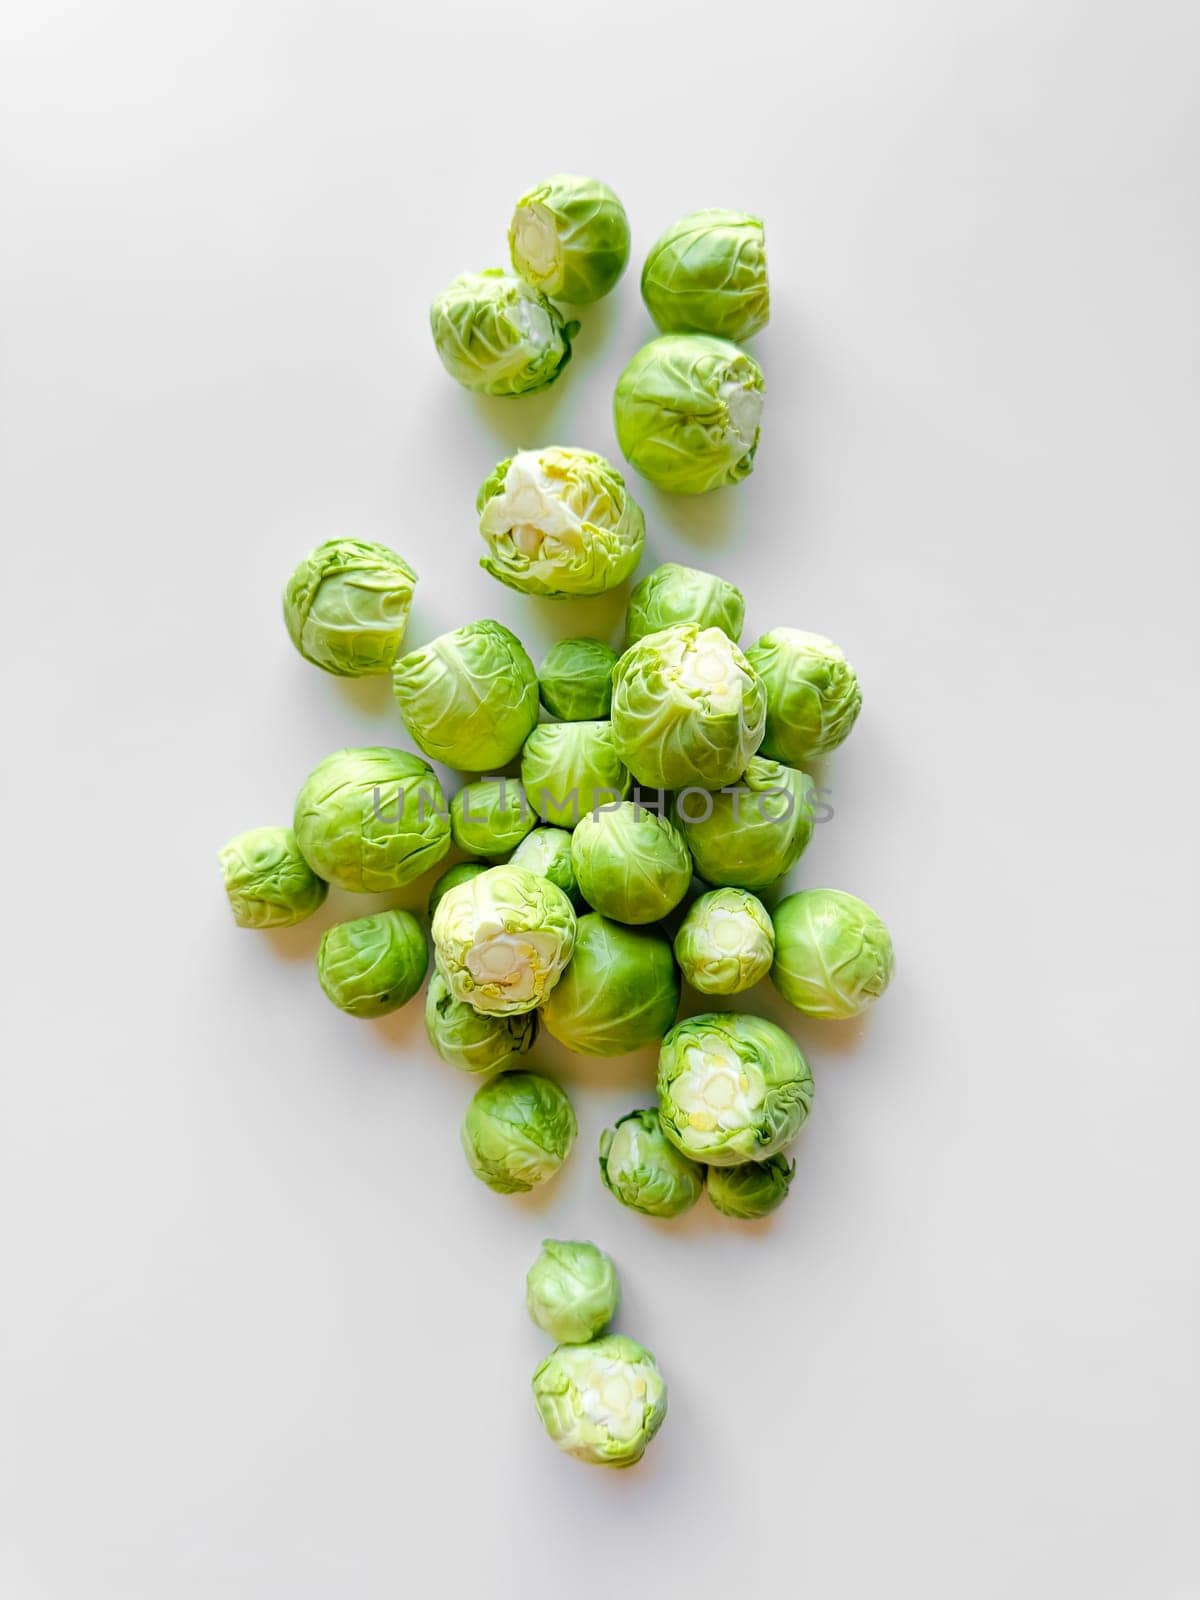 Fresh green Brussels sprouts on white background, healthy eating concept. High quality photo